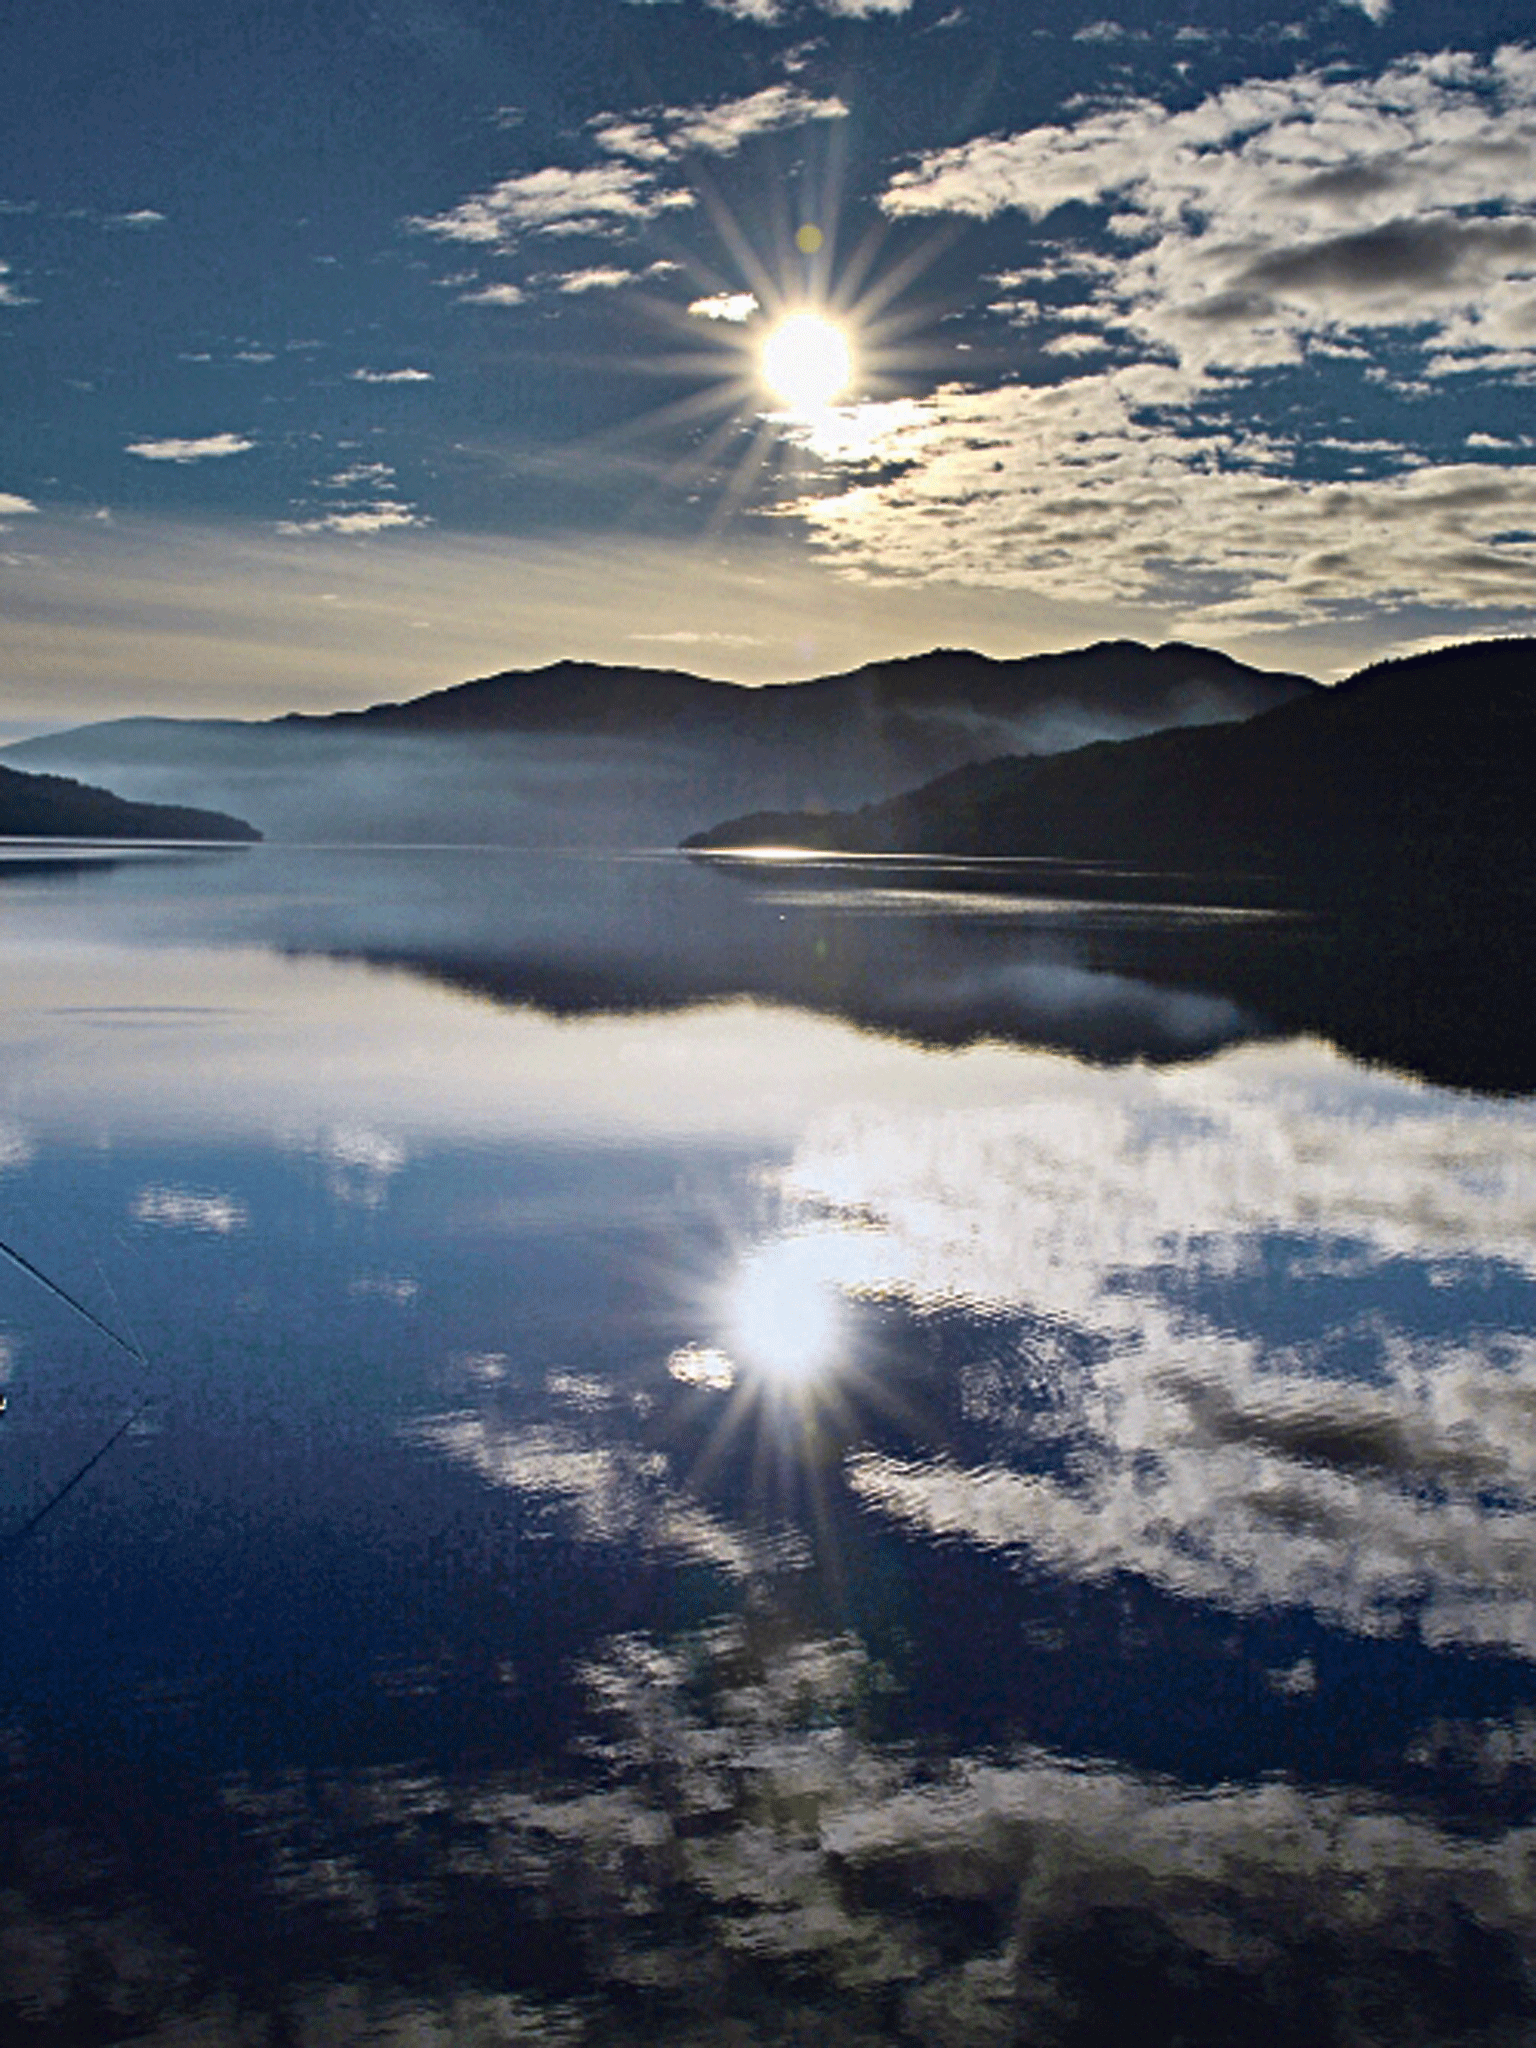 Reflective calm: Loch Lomond, where 'the scenery is stunning'